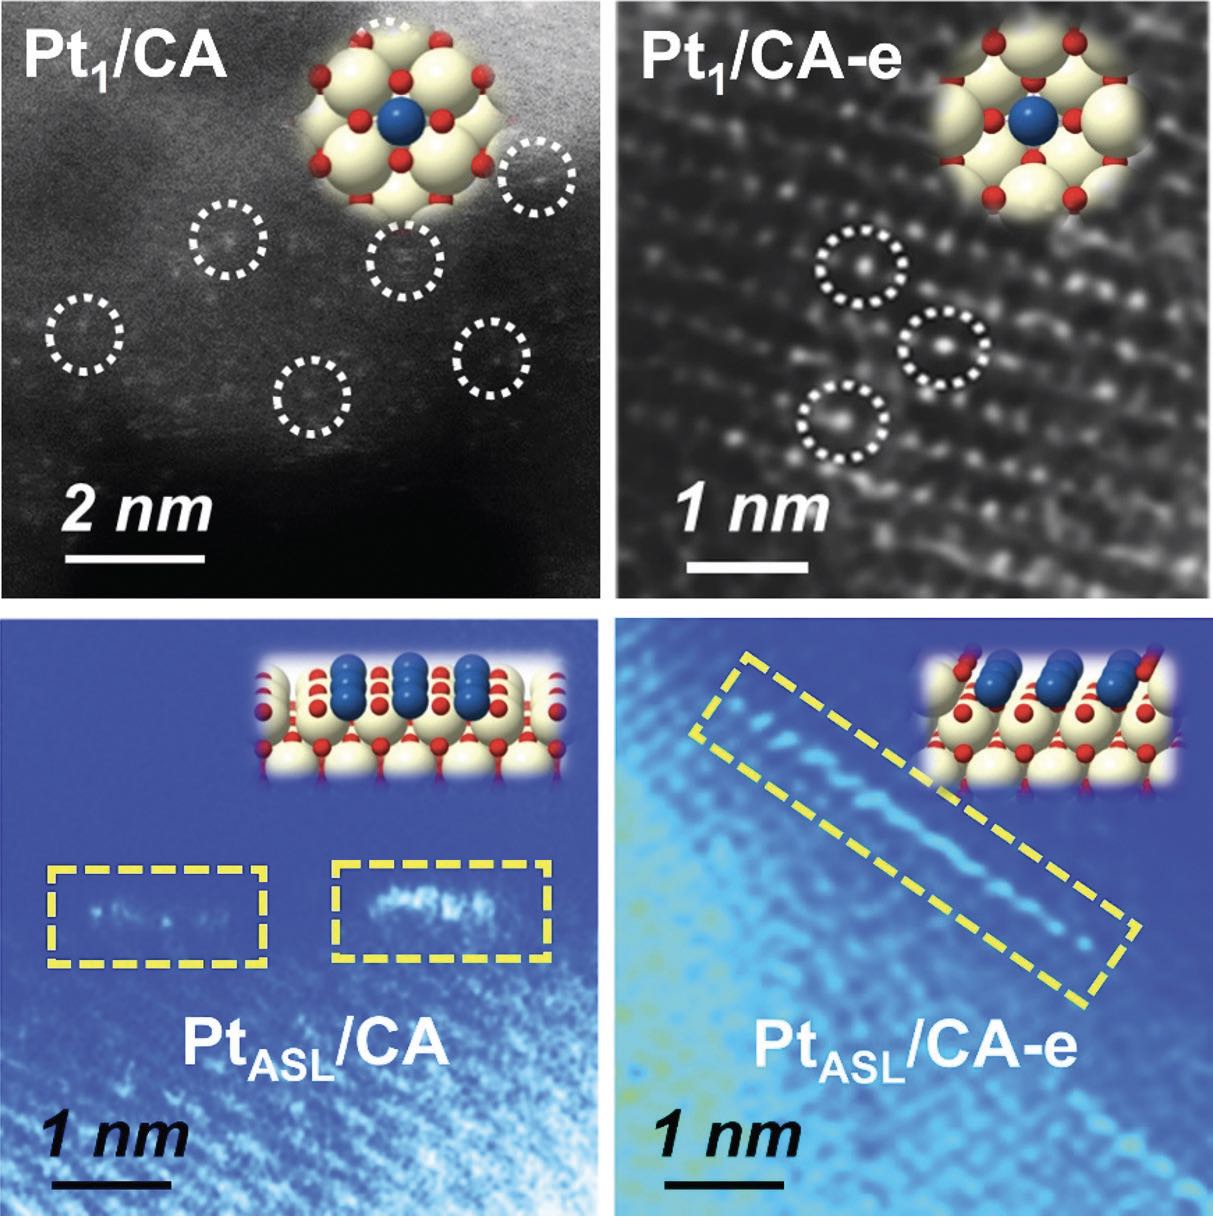 Figure 1. AC-STEM images and structure models as inserted for adsorbed Pt single-atom catalyst (Pt1/CA), embedded Pt single-atom catalyst (Pt1/CA-e), adsorbed Pt atomic single-layer catalyst (PtASL/CA) and embedded Pt atomic single-layer catalyst (PtASL/CA-e) are shown. Figure courtesy of the University of Central Florida.